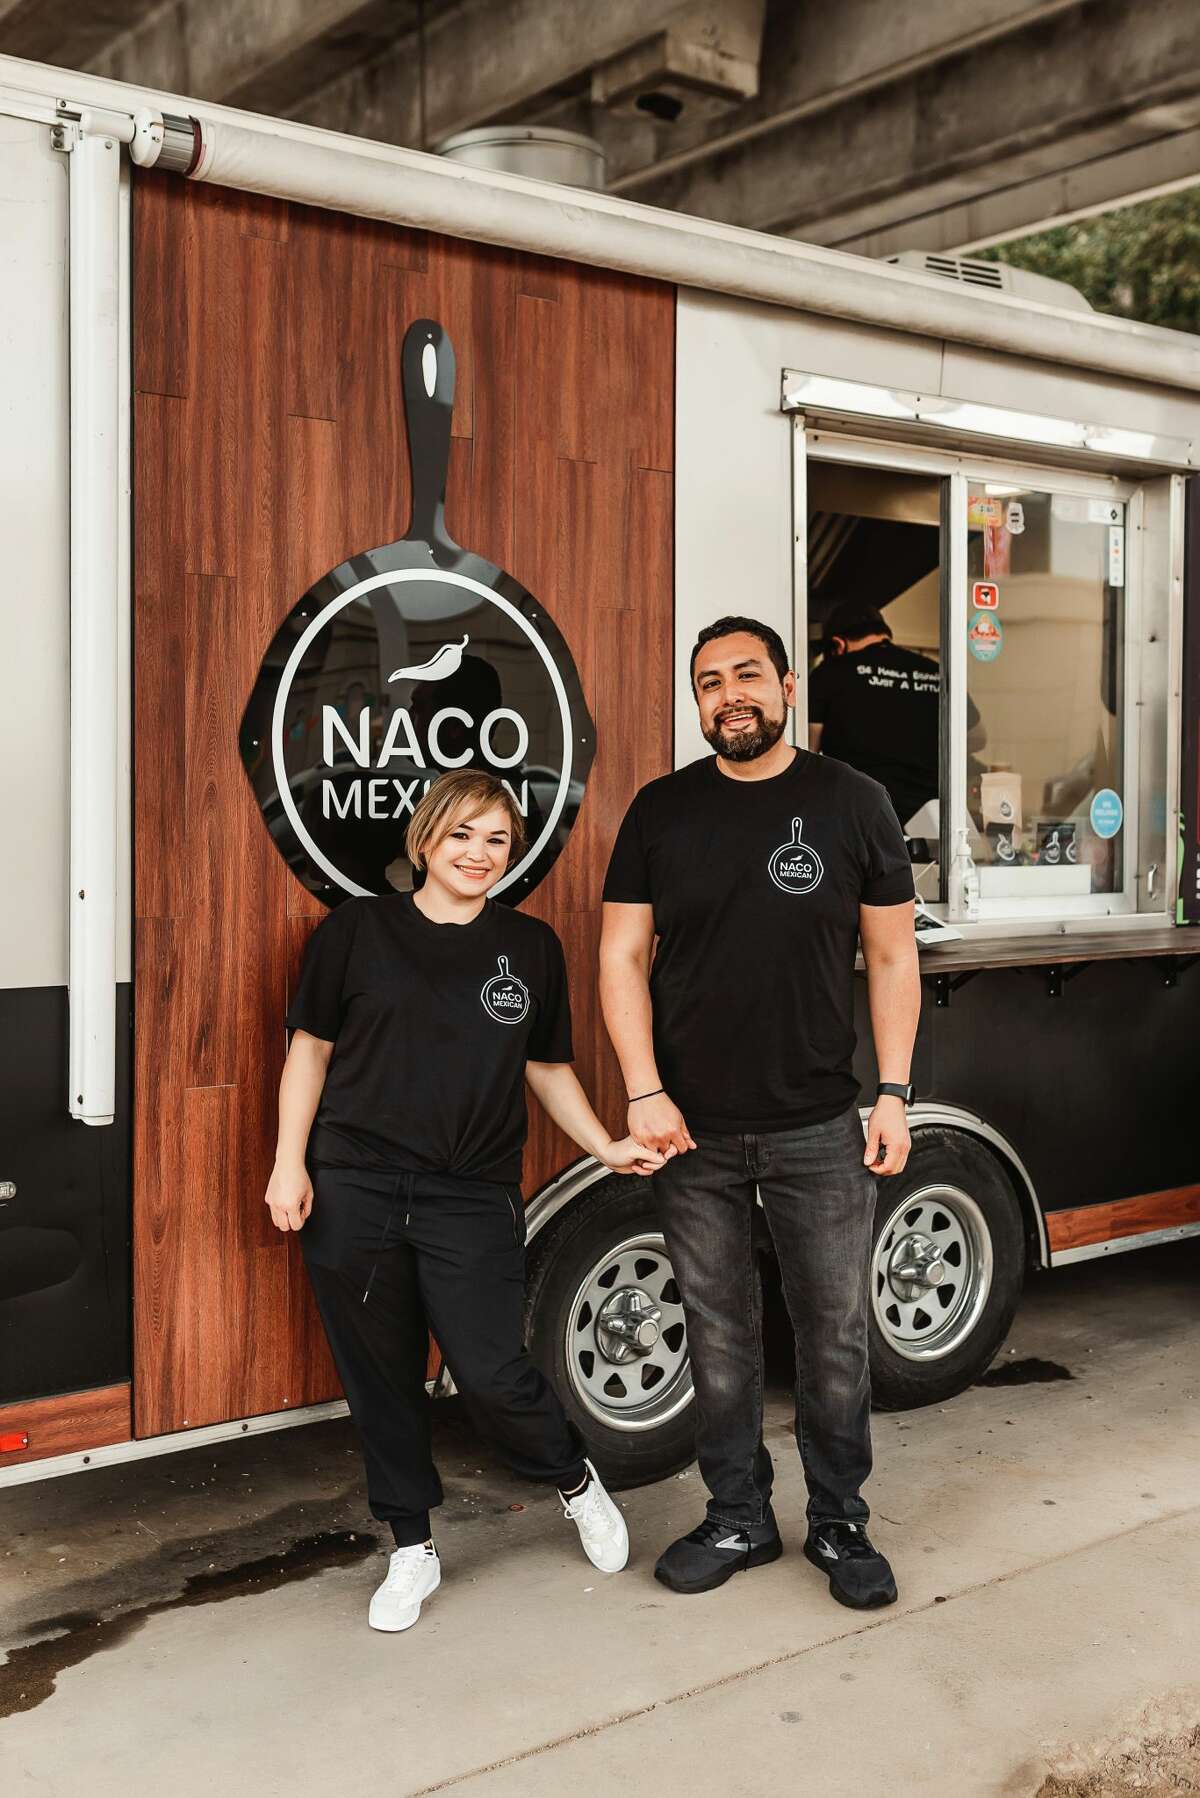 Naco Mexican Eatery, a popular San Antonio food truck, is graduating to its first brick-and-mortar location. An exact grand opening date has not been revealed, but the restaurant is expected to open at Los Patios, an oasis of event space and offices tucked in the woods near Salado Creek, in the fall, according to a news release. 